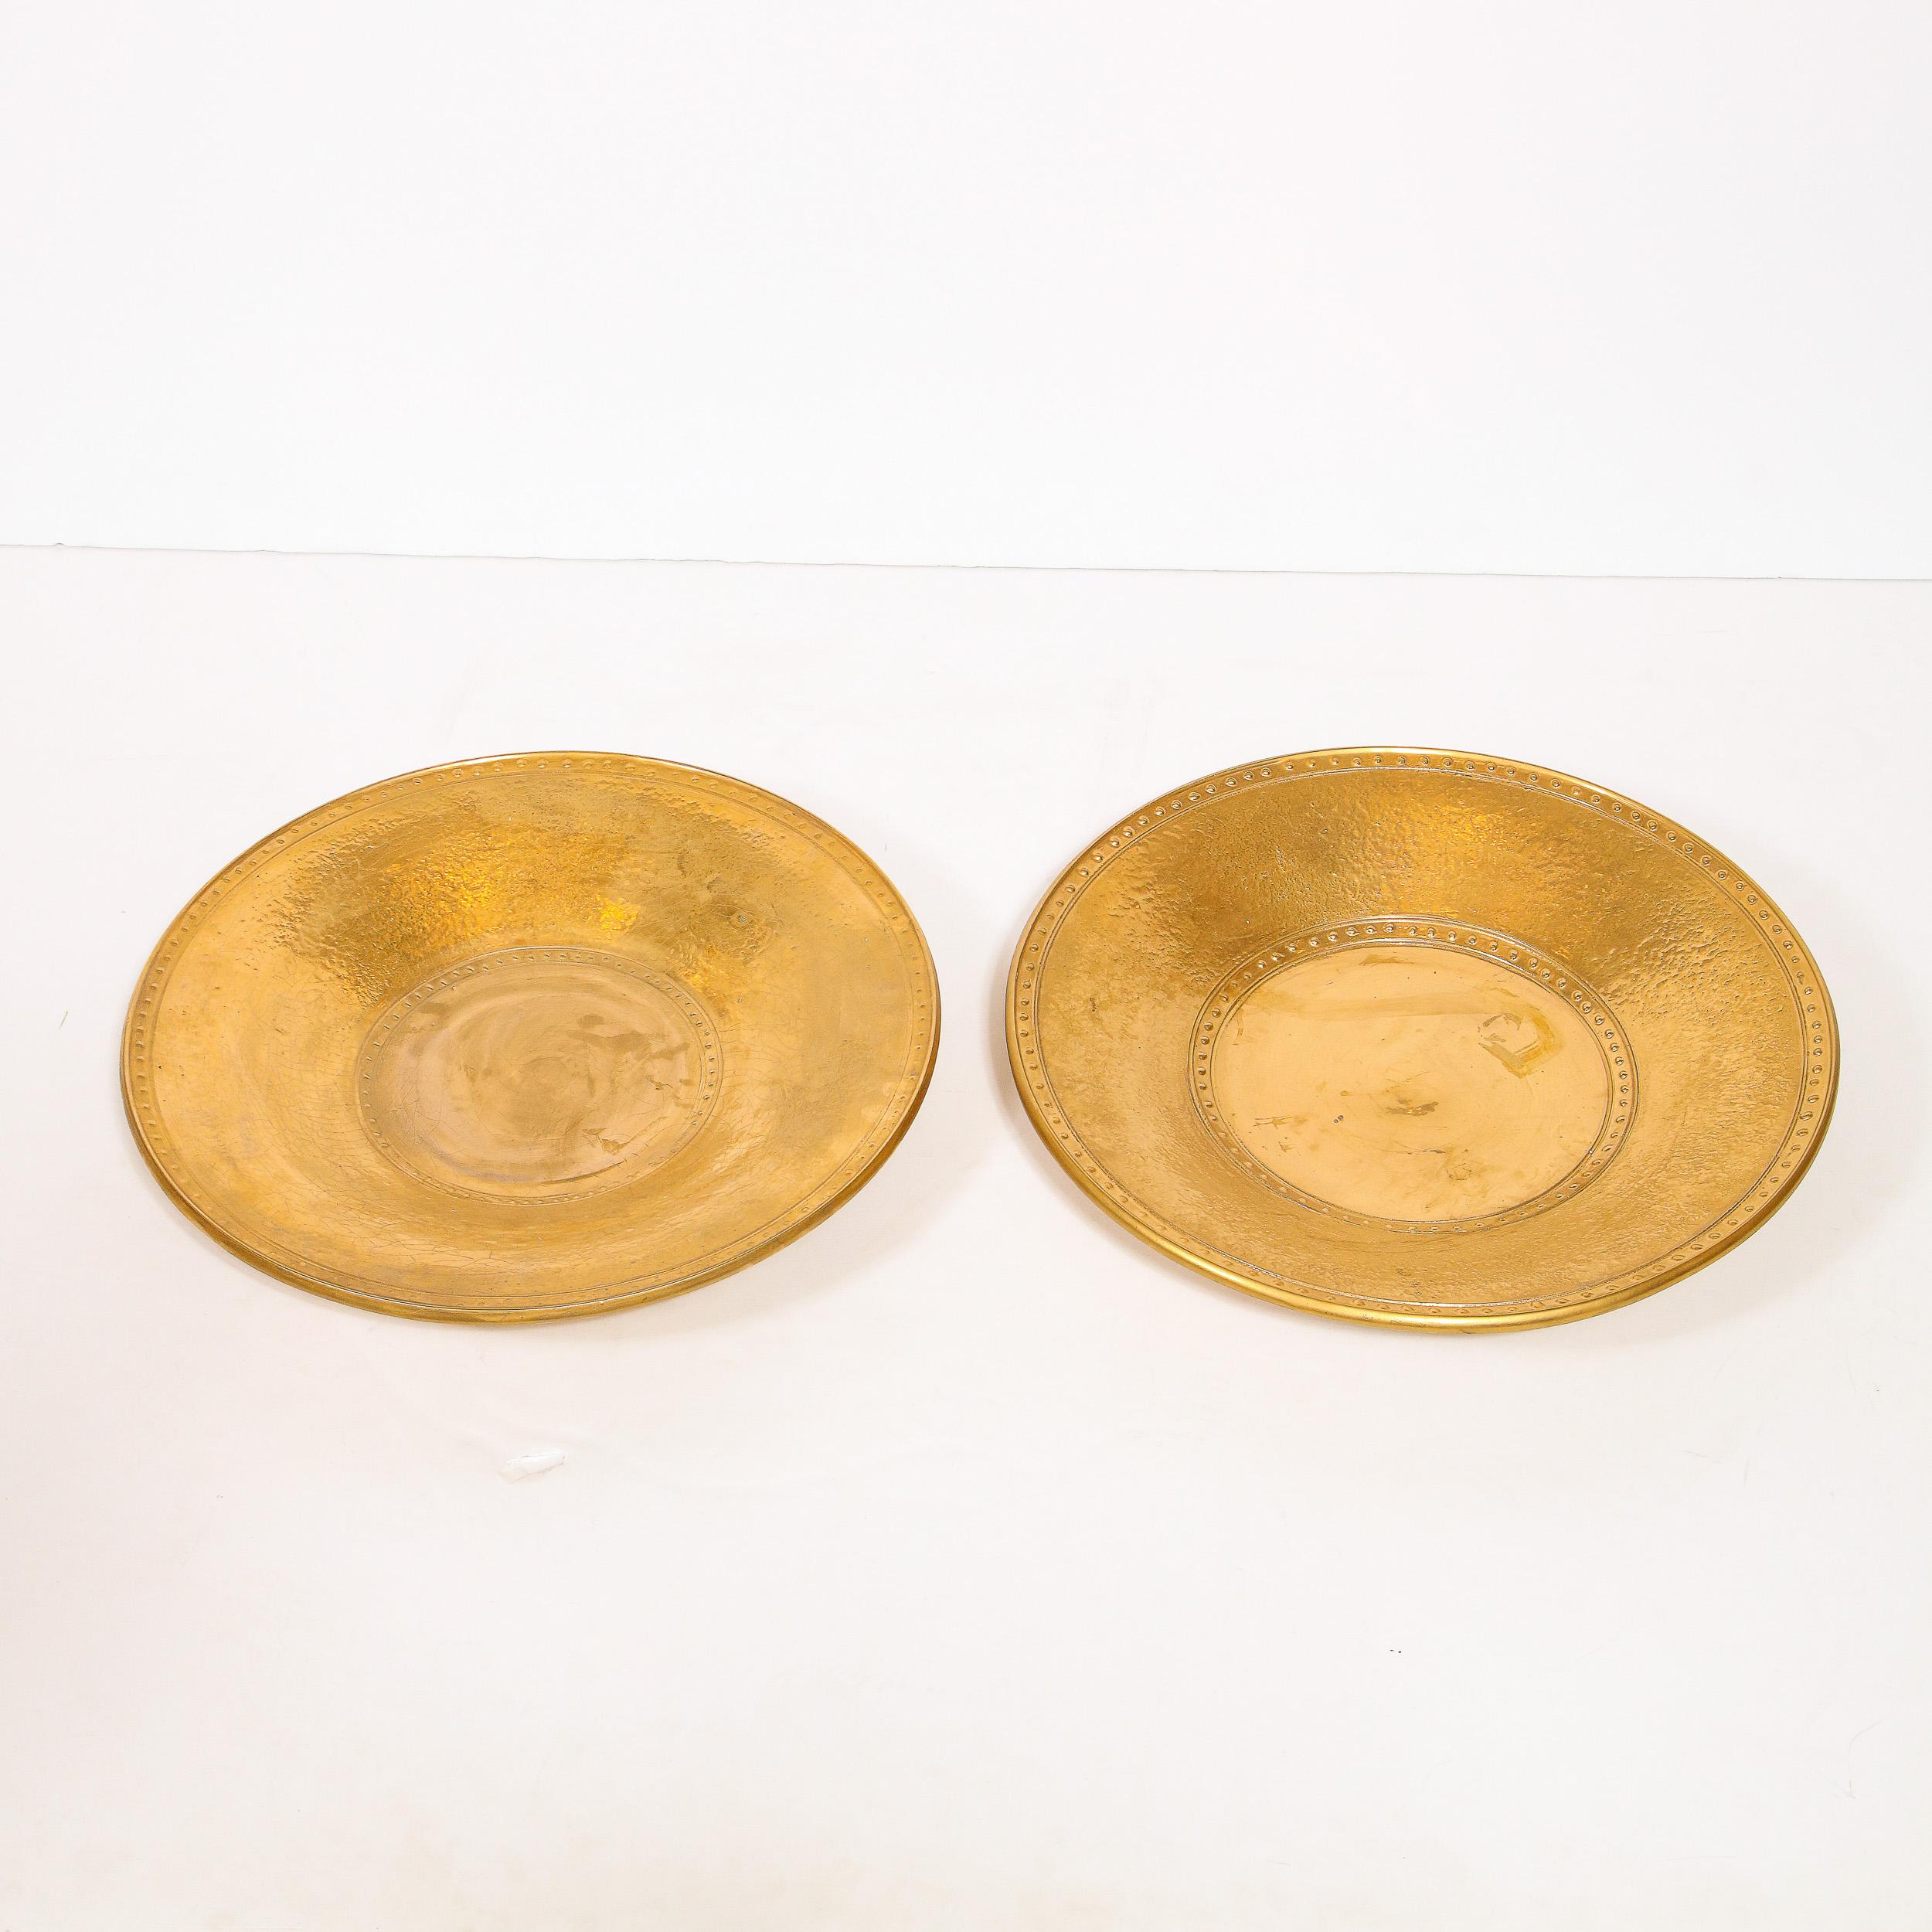 Pair of Modernist 24kt Gold Leaf Center Plates Signed Rondier by Lorin Marsh 8